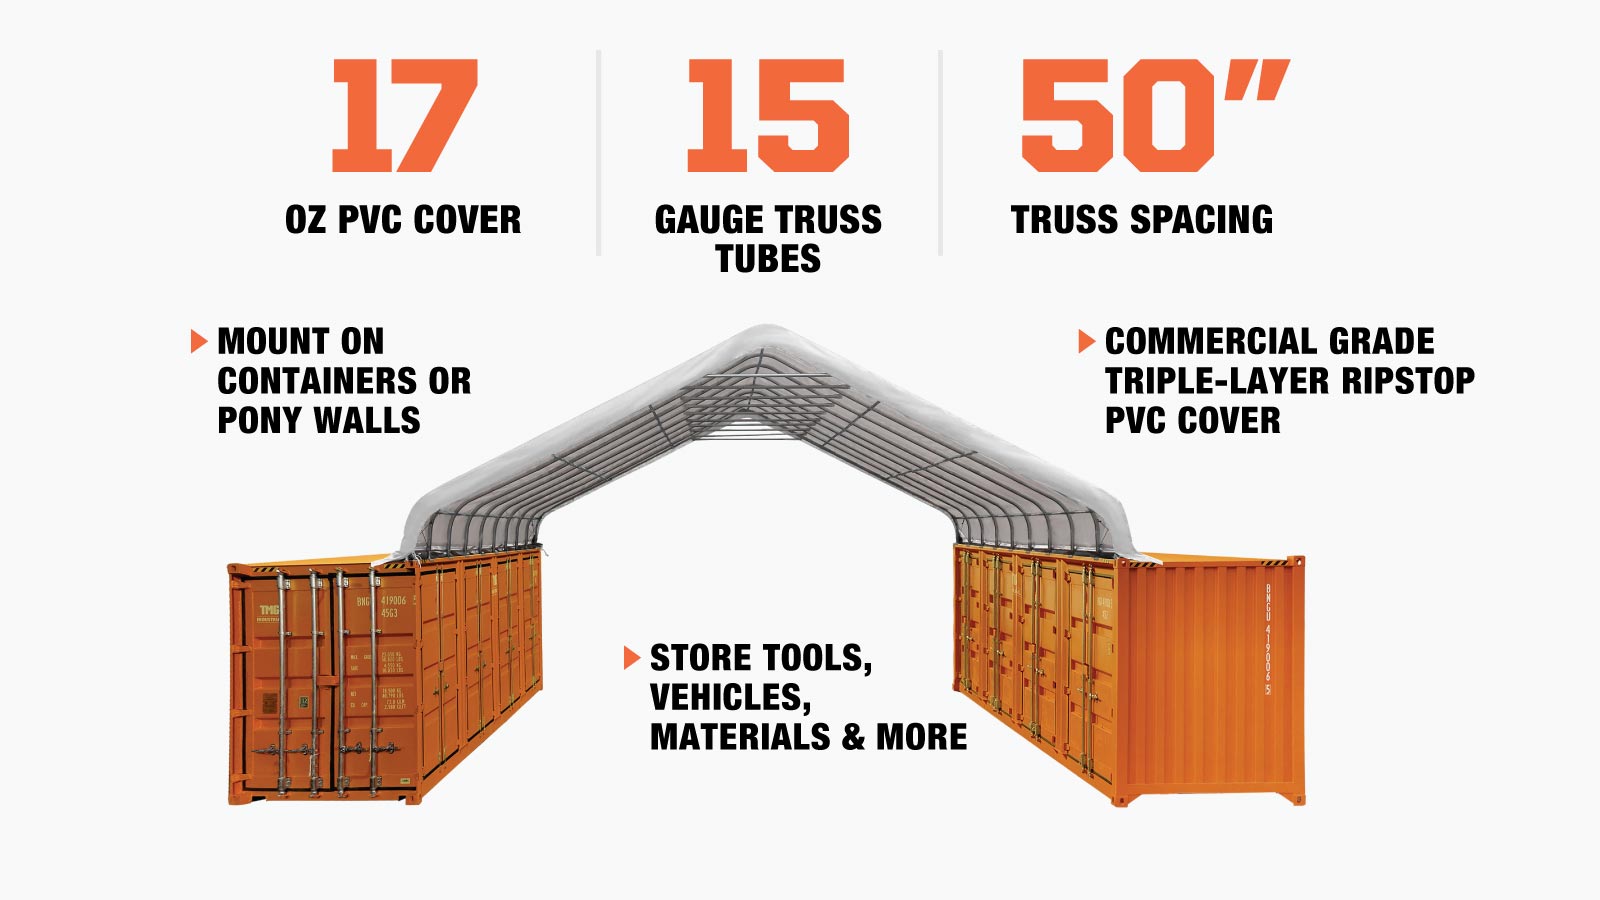 TMG Industrial 30' x 40' PVC Fabric Container Peak Roof Shelter Pro Series, Fire Retardant, Water Resistant, UV Protected, TMG-ST3041CV (Previously ST3040CV)-description-image